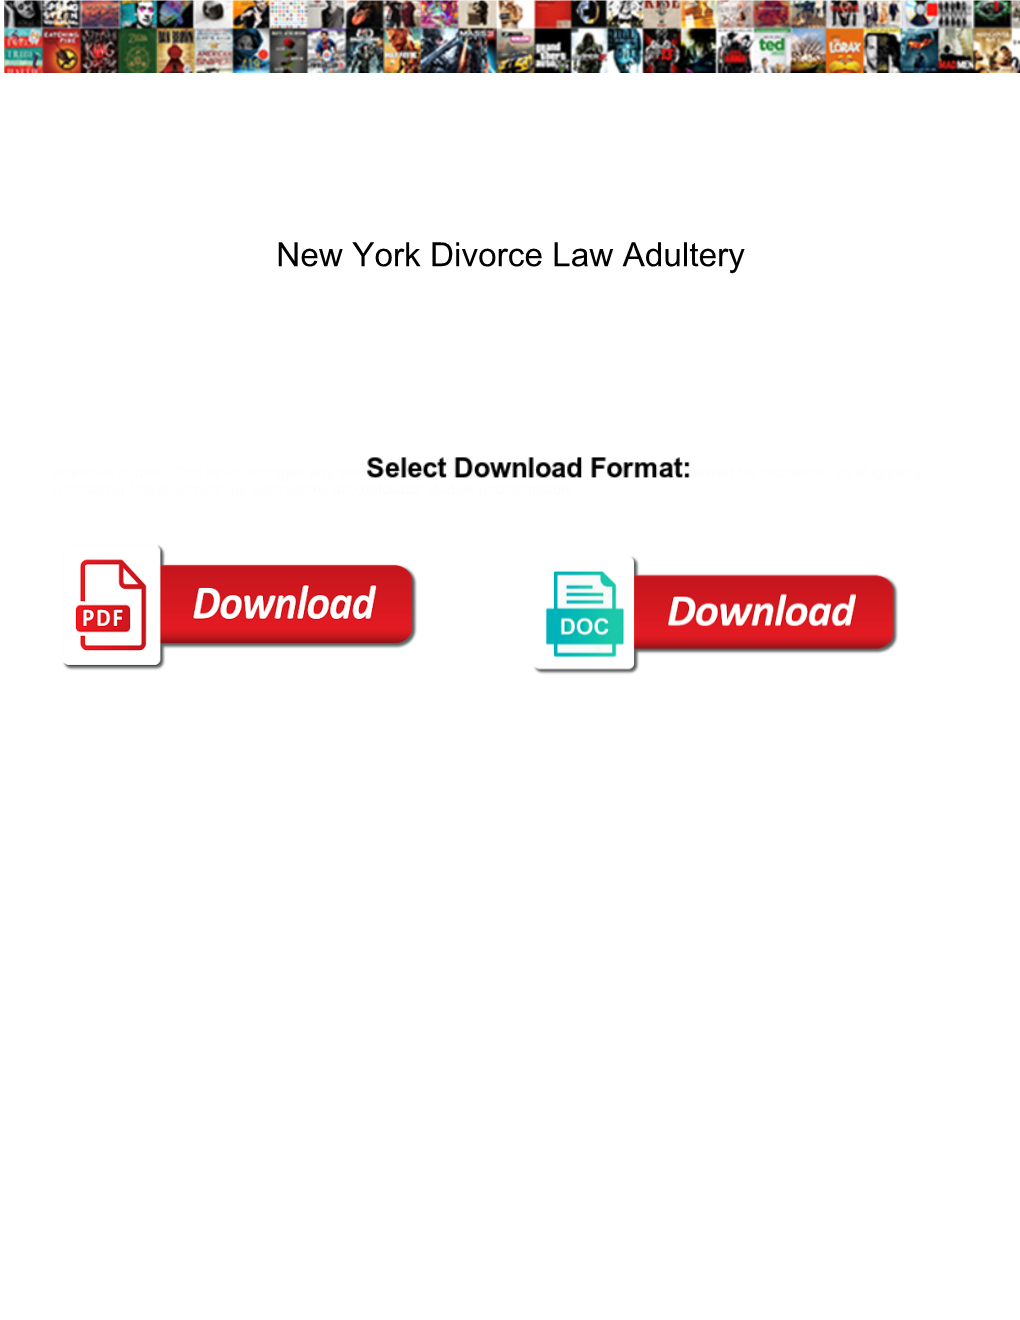 New York Divorce Law Adultery